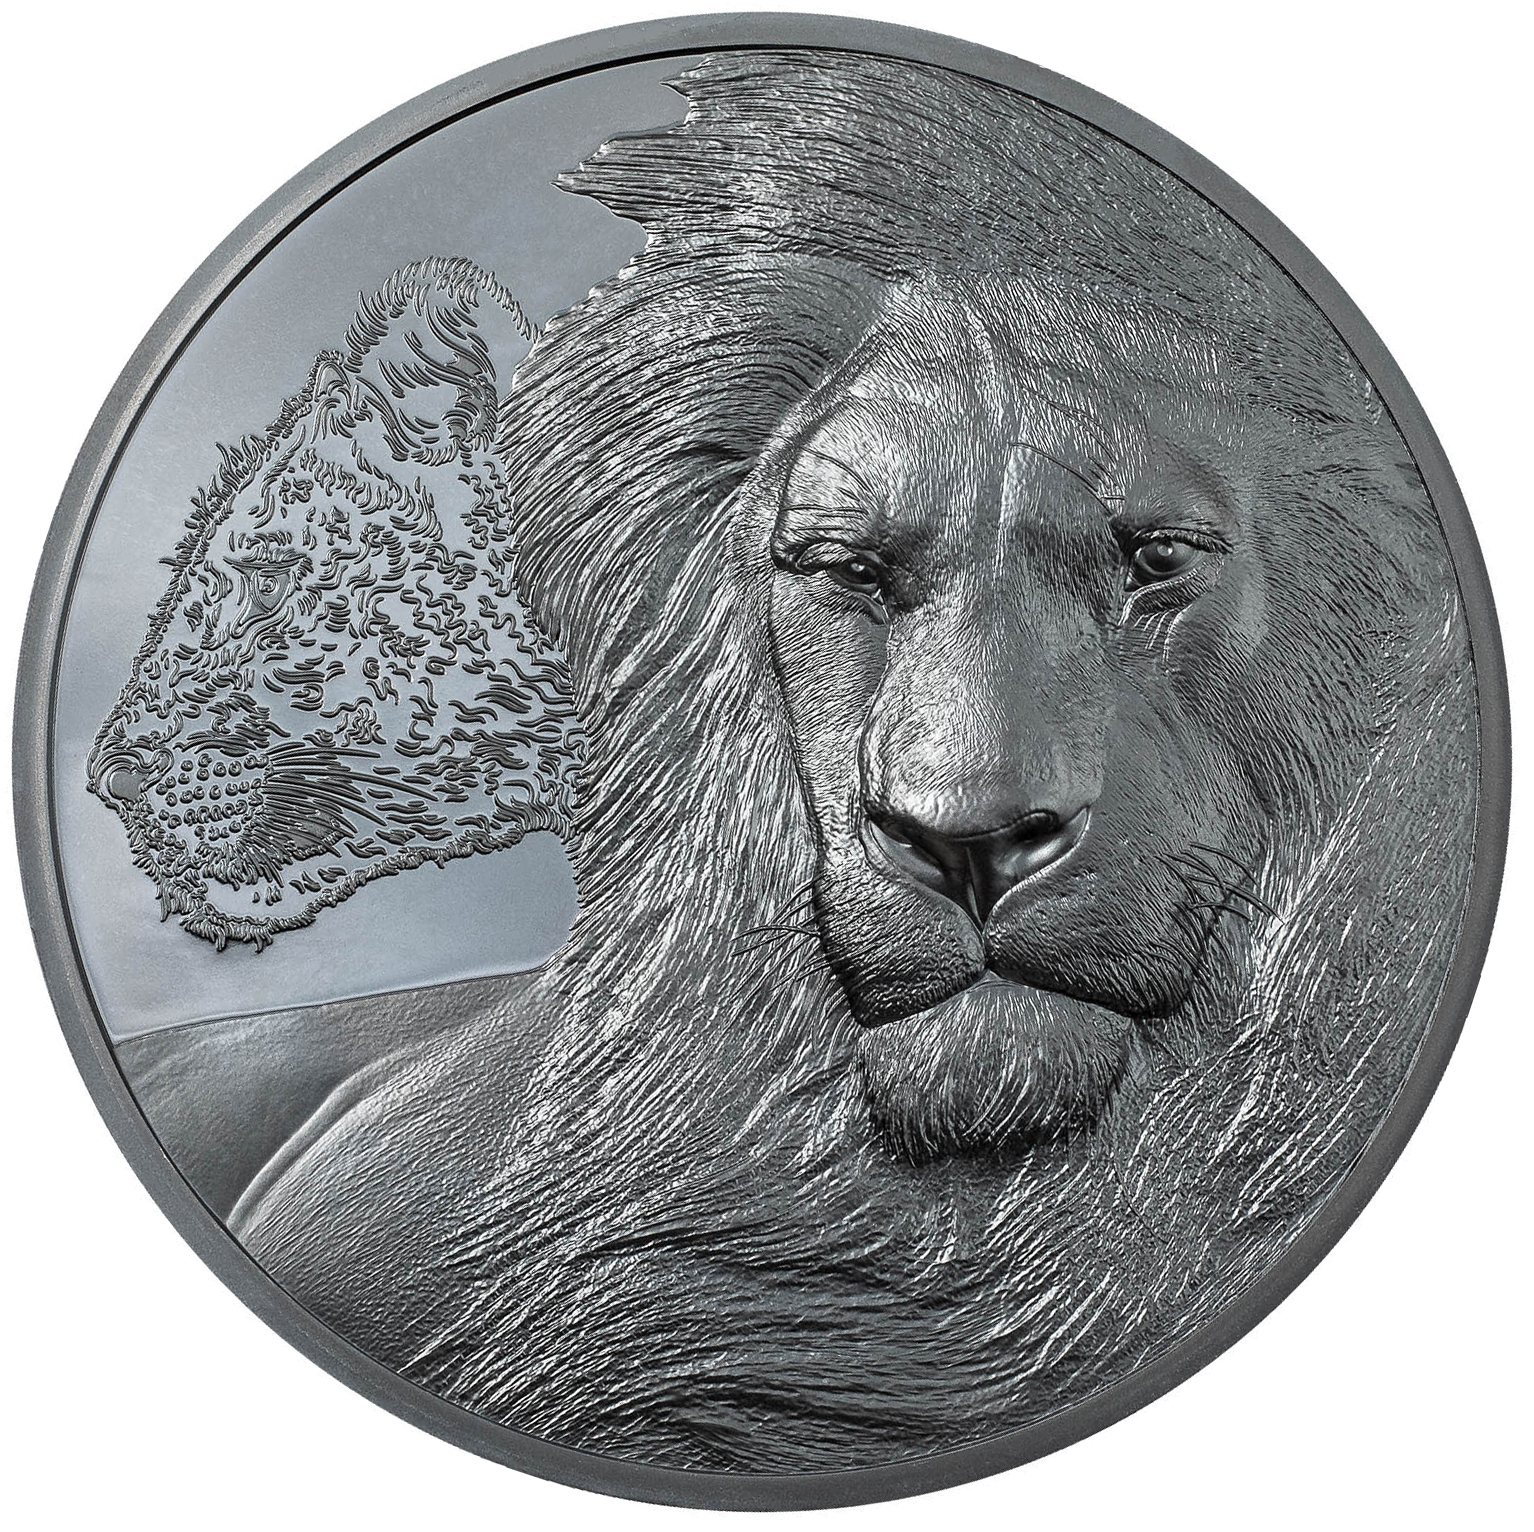 Tanzania 2022 3000 Shillings Lions 5oz - Growing Up silver proof coin